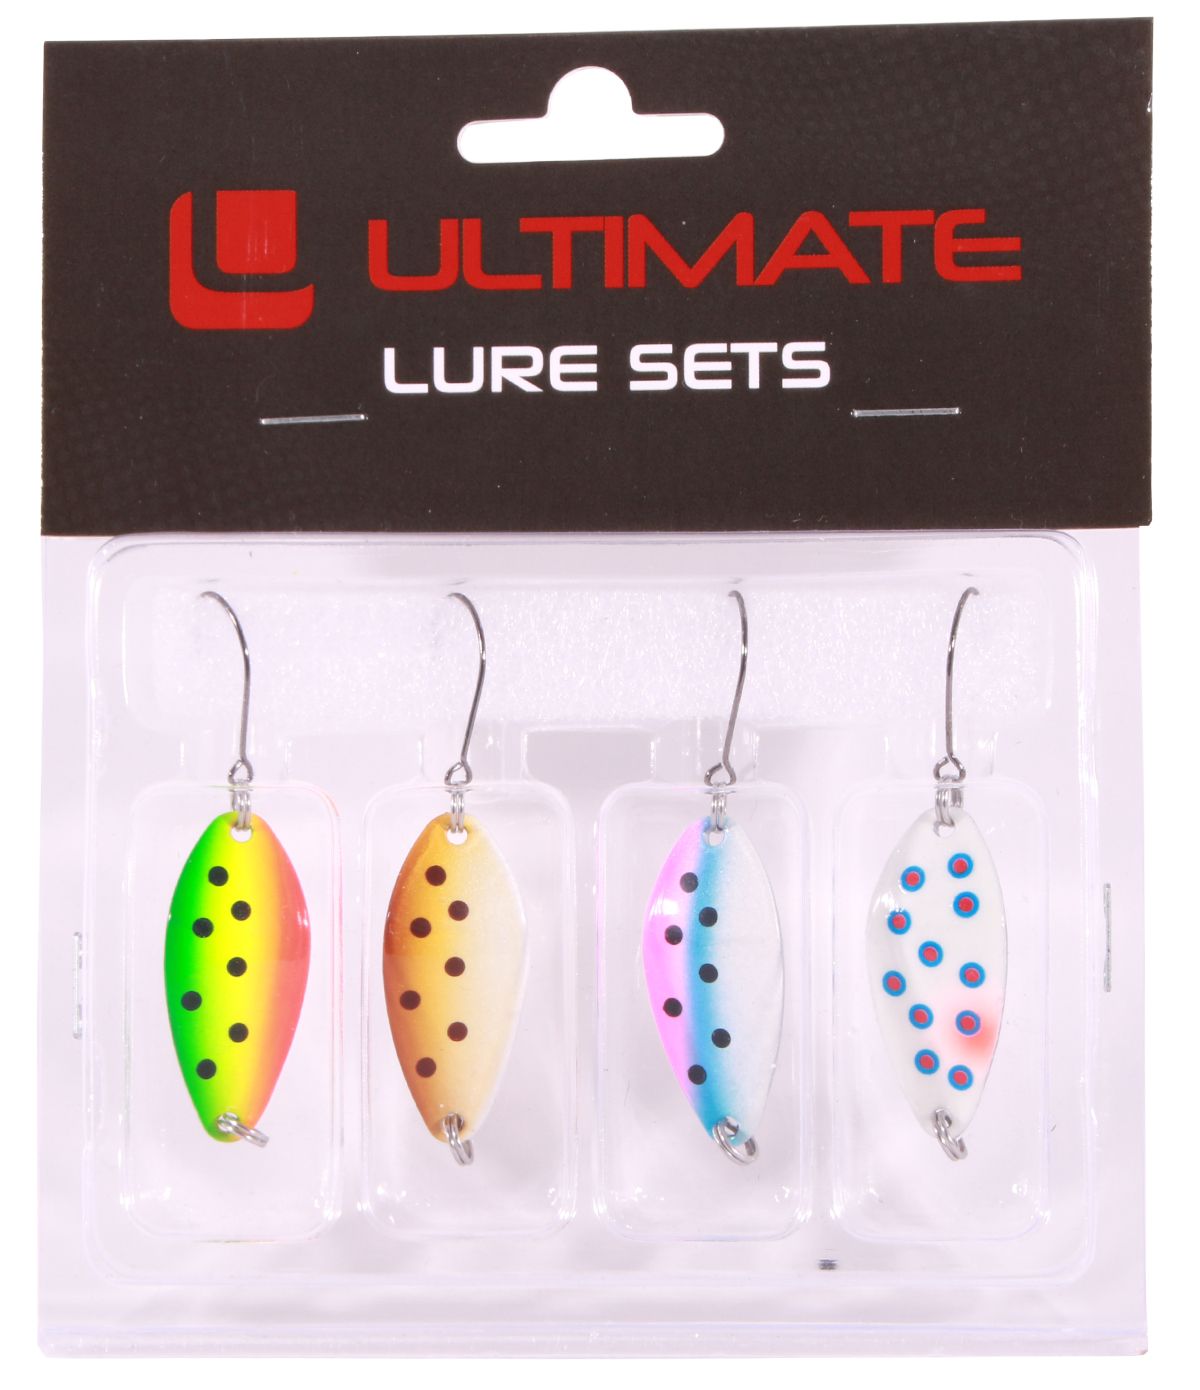 Ultimate Ultralight Spoon Selection - 4 pieces